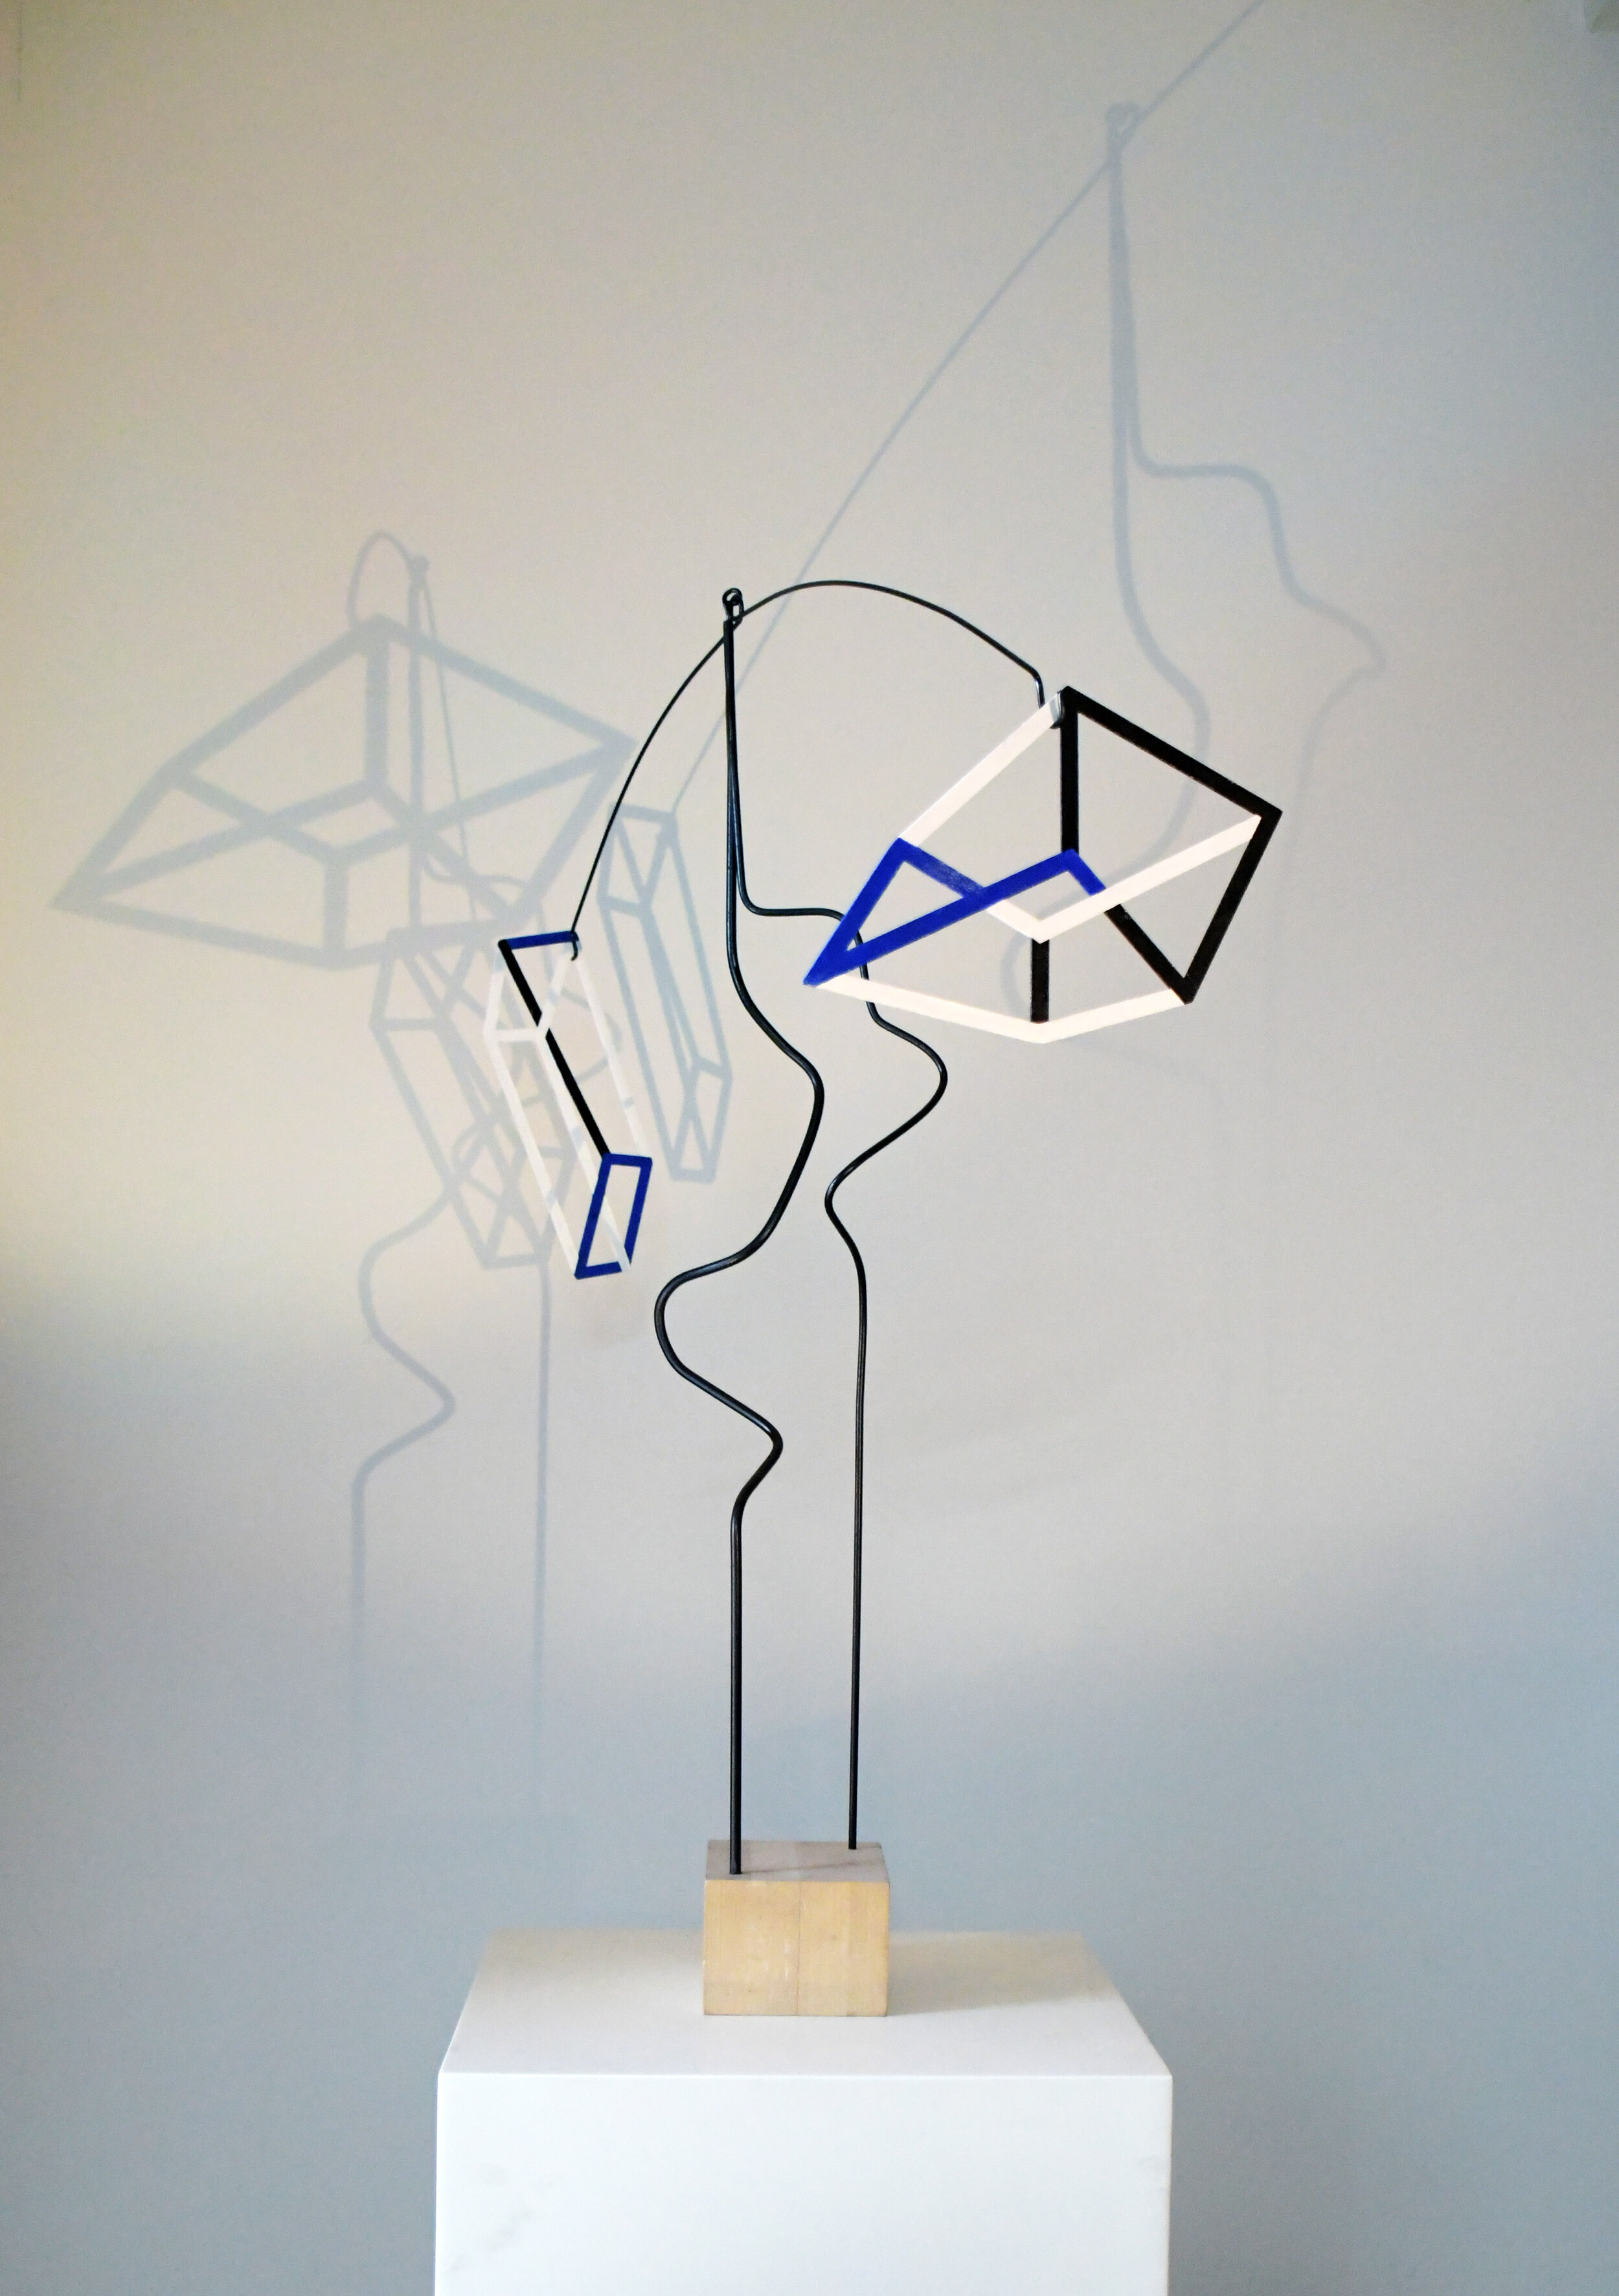  Wendy Letven,  Counterpoint , 2020 ,  Painted Aluminum, Steel with wood base, 33 x 33 x 4 inches 